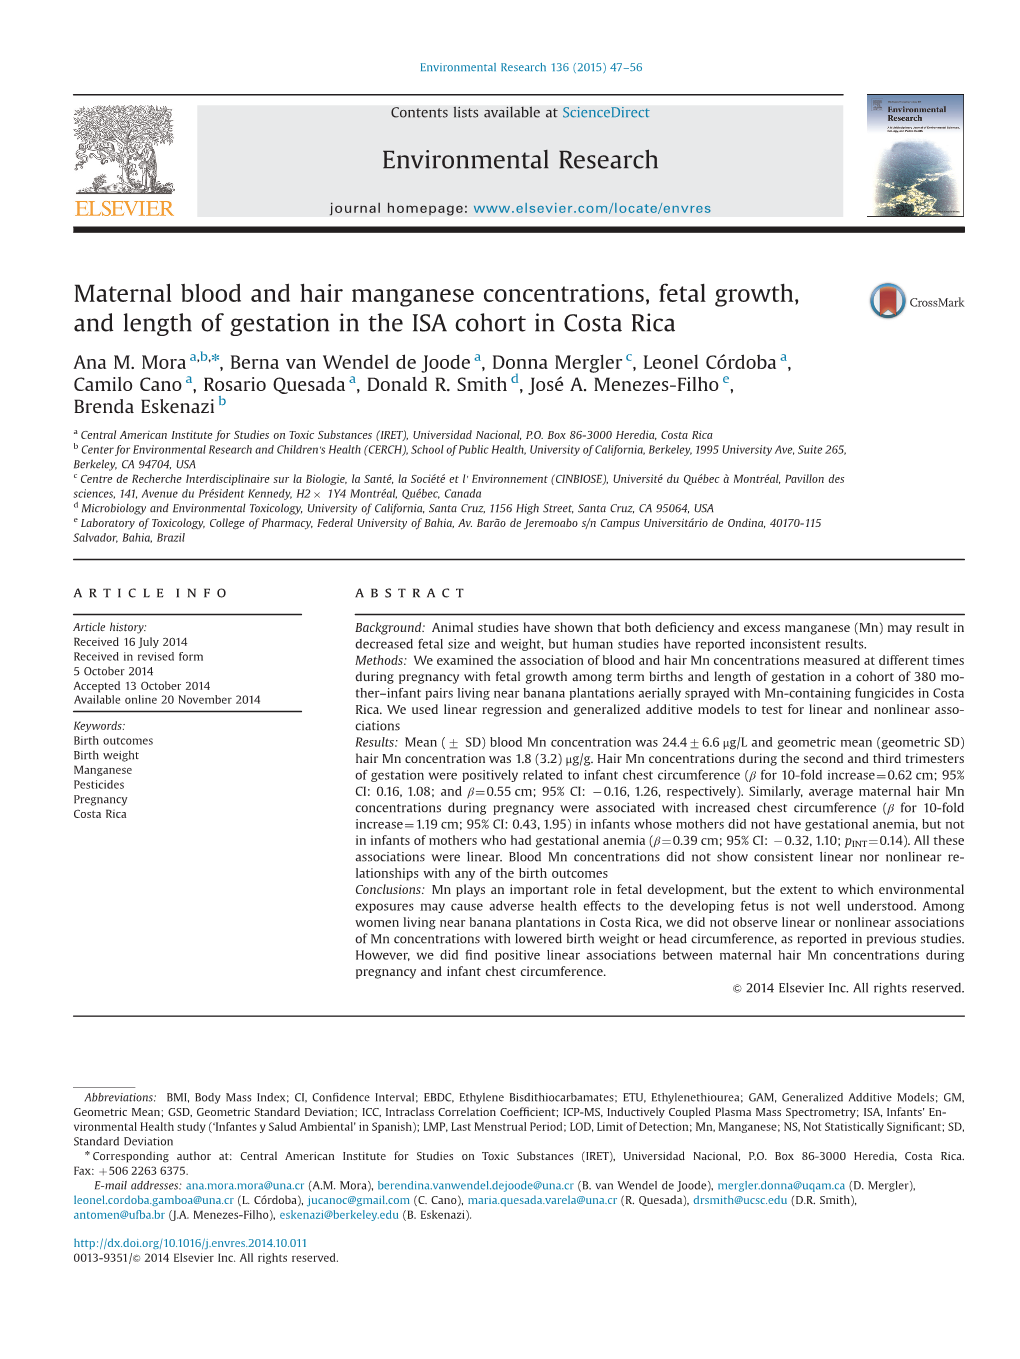 Maternal Blood and Hair Manganese Concentrations, Fetal Growth, and Length of Gestation in the ISA Cohort in Costa Rica